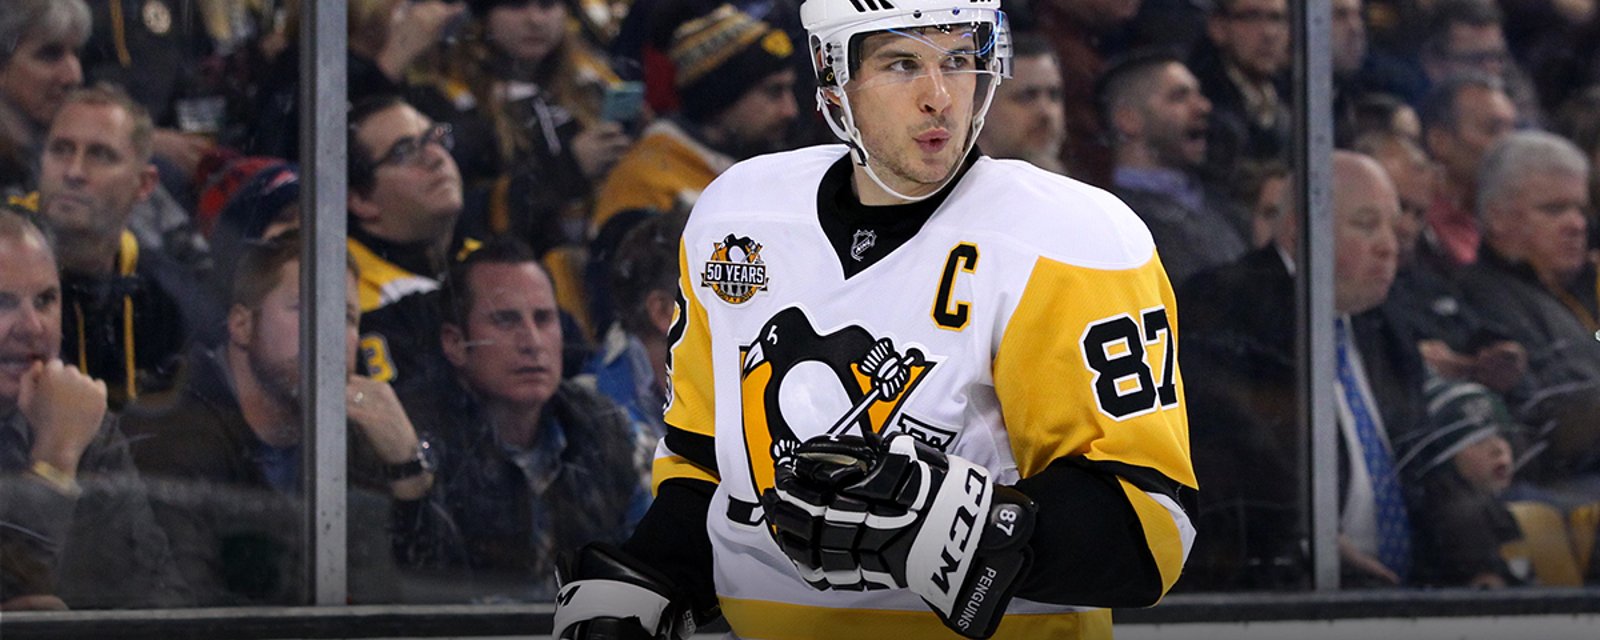 Sidney Crosby weighs in on controversial topic ahead of All-Star game